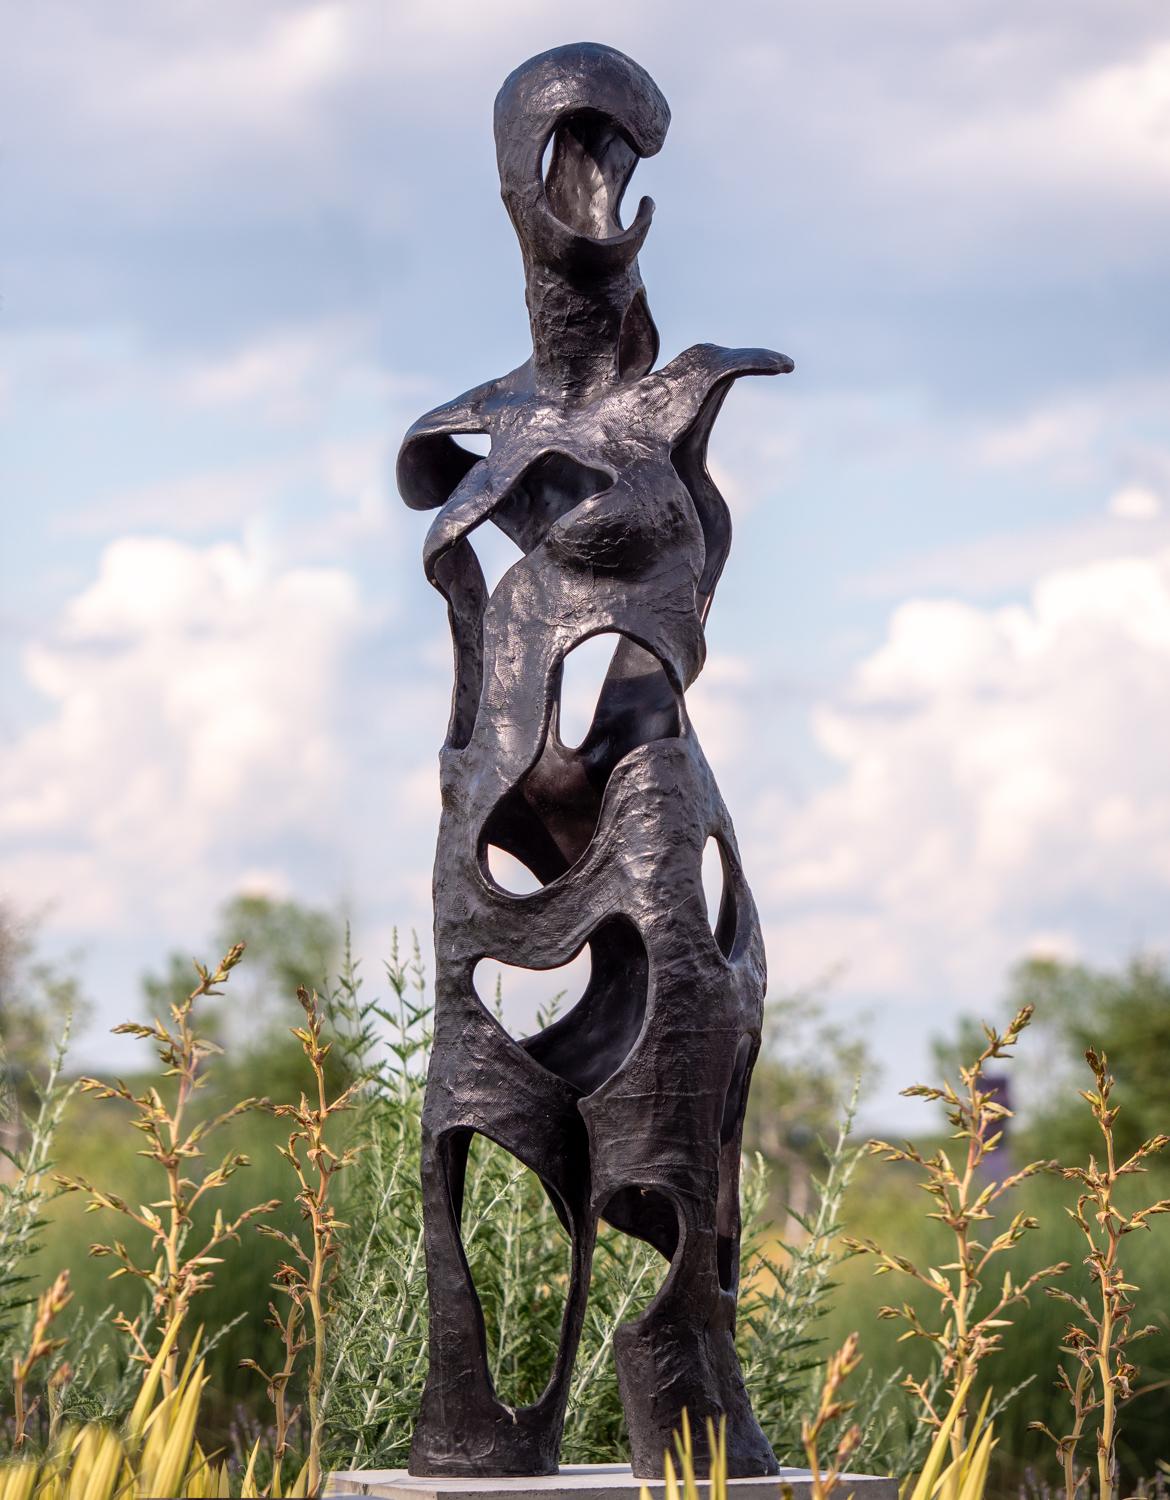 David Fisher Figurative Sculpture - V_N_S Edition 3/9 - tall, abstracted, figurative female bronze outdoor sculpture